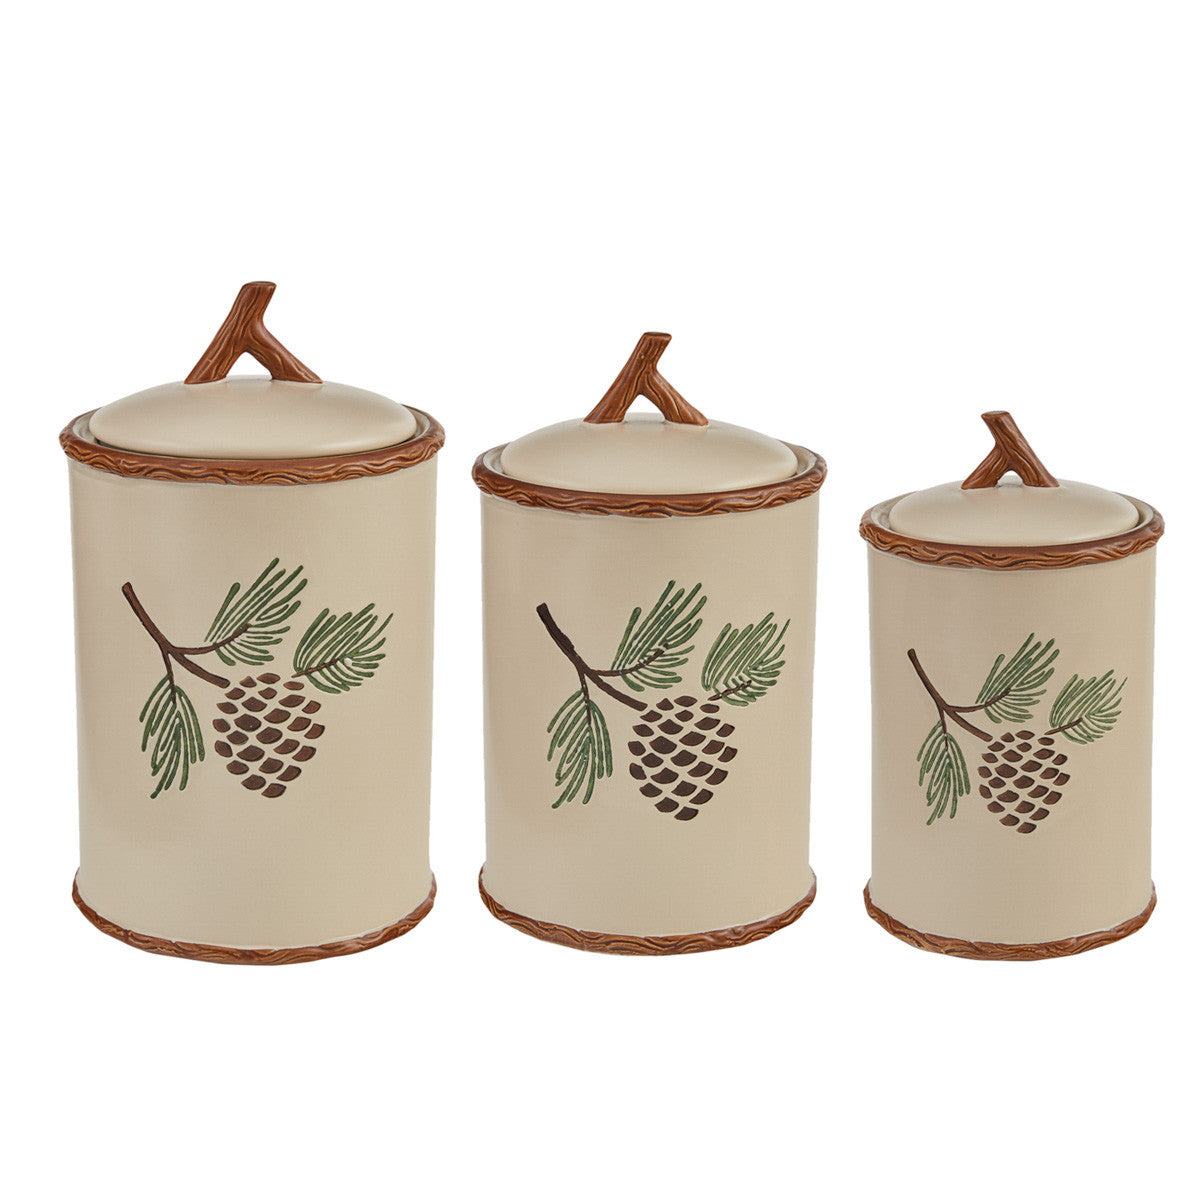 Pinecroft Canisters - Set of 3 Canister Park Designs